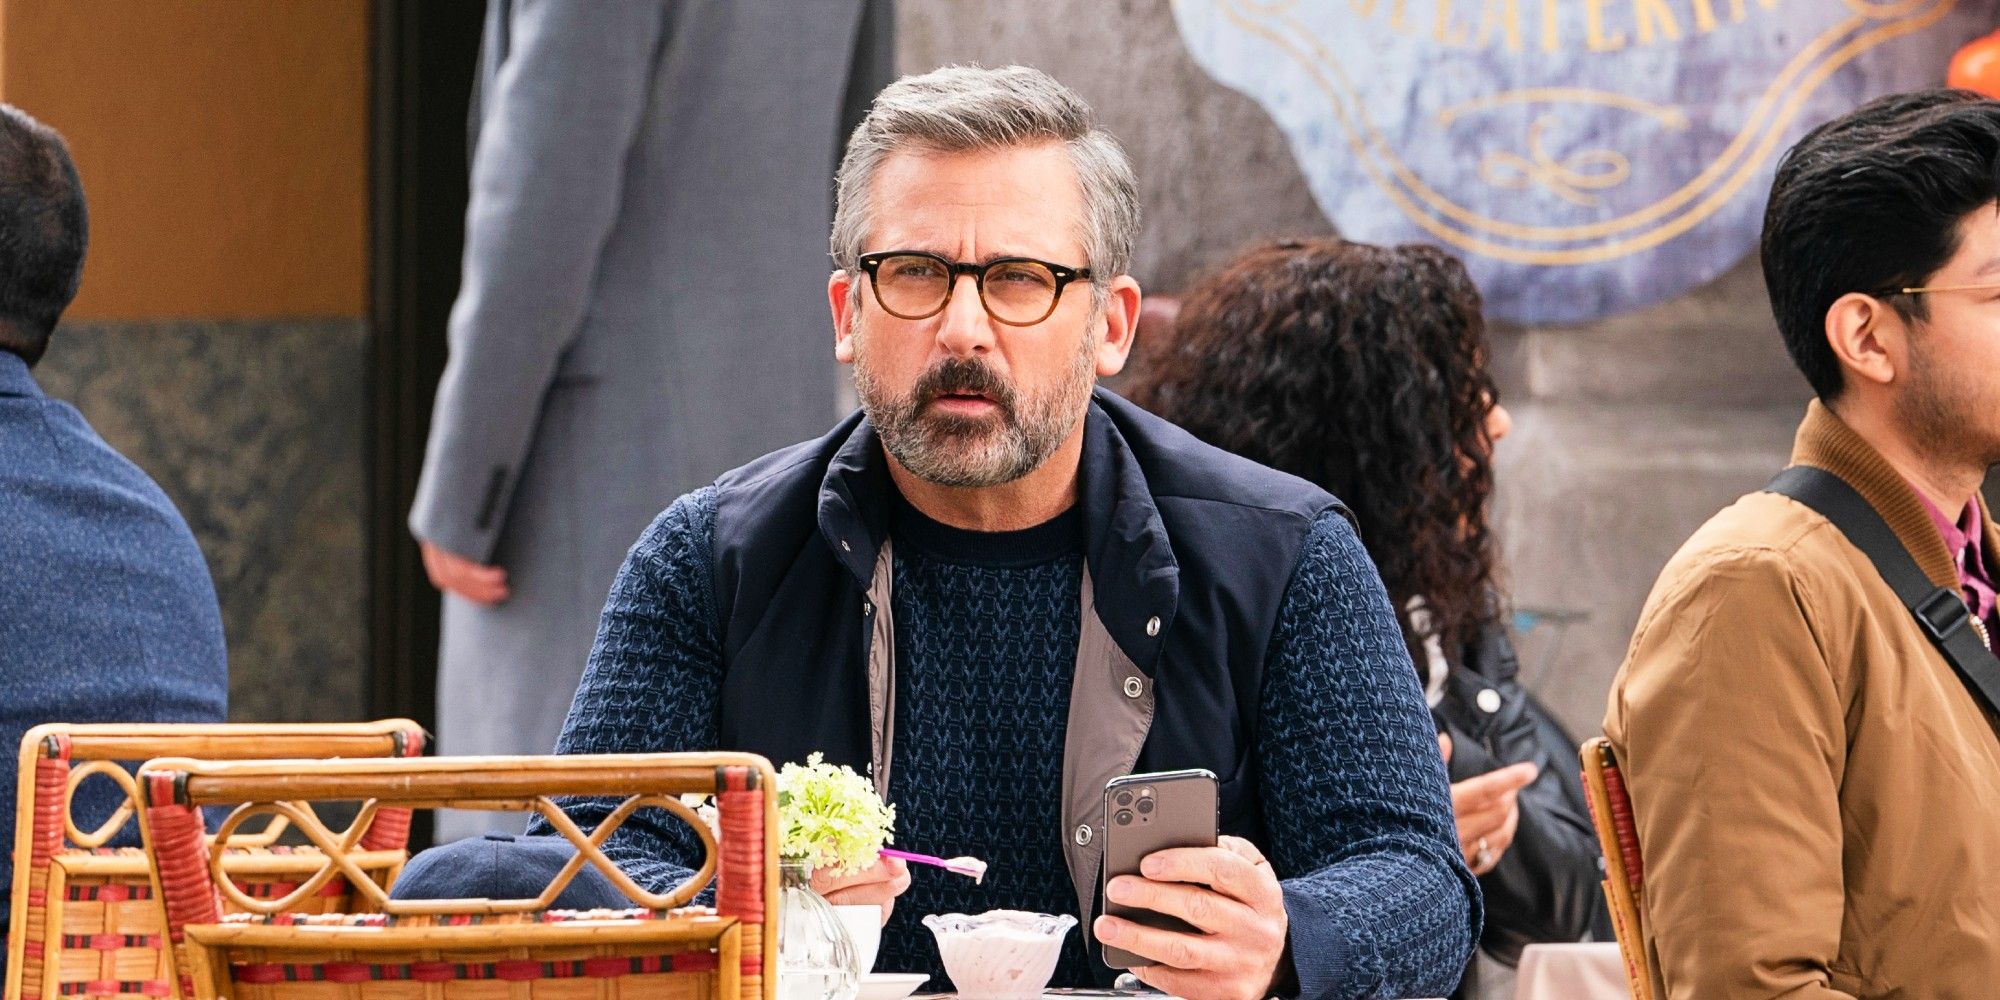 Steve Carrell Starring In New Comedy Series From Ted Lasso Co-Creator